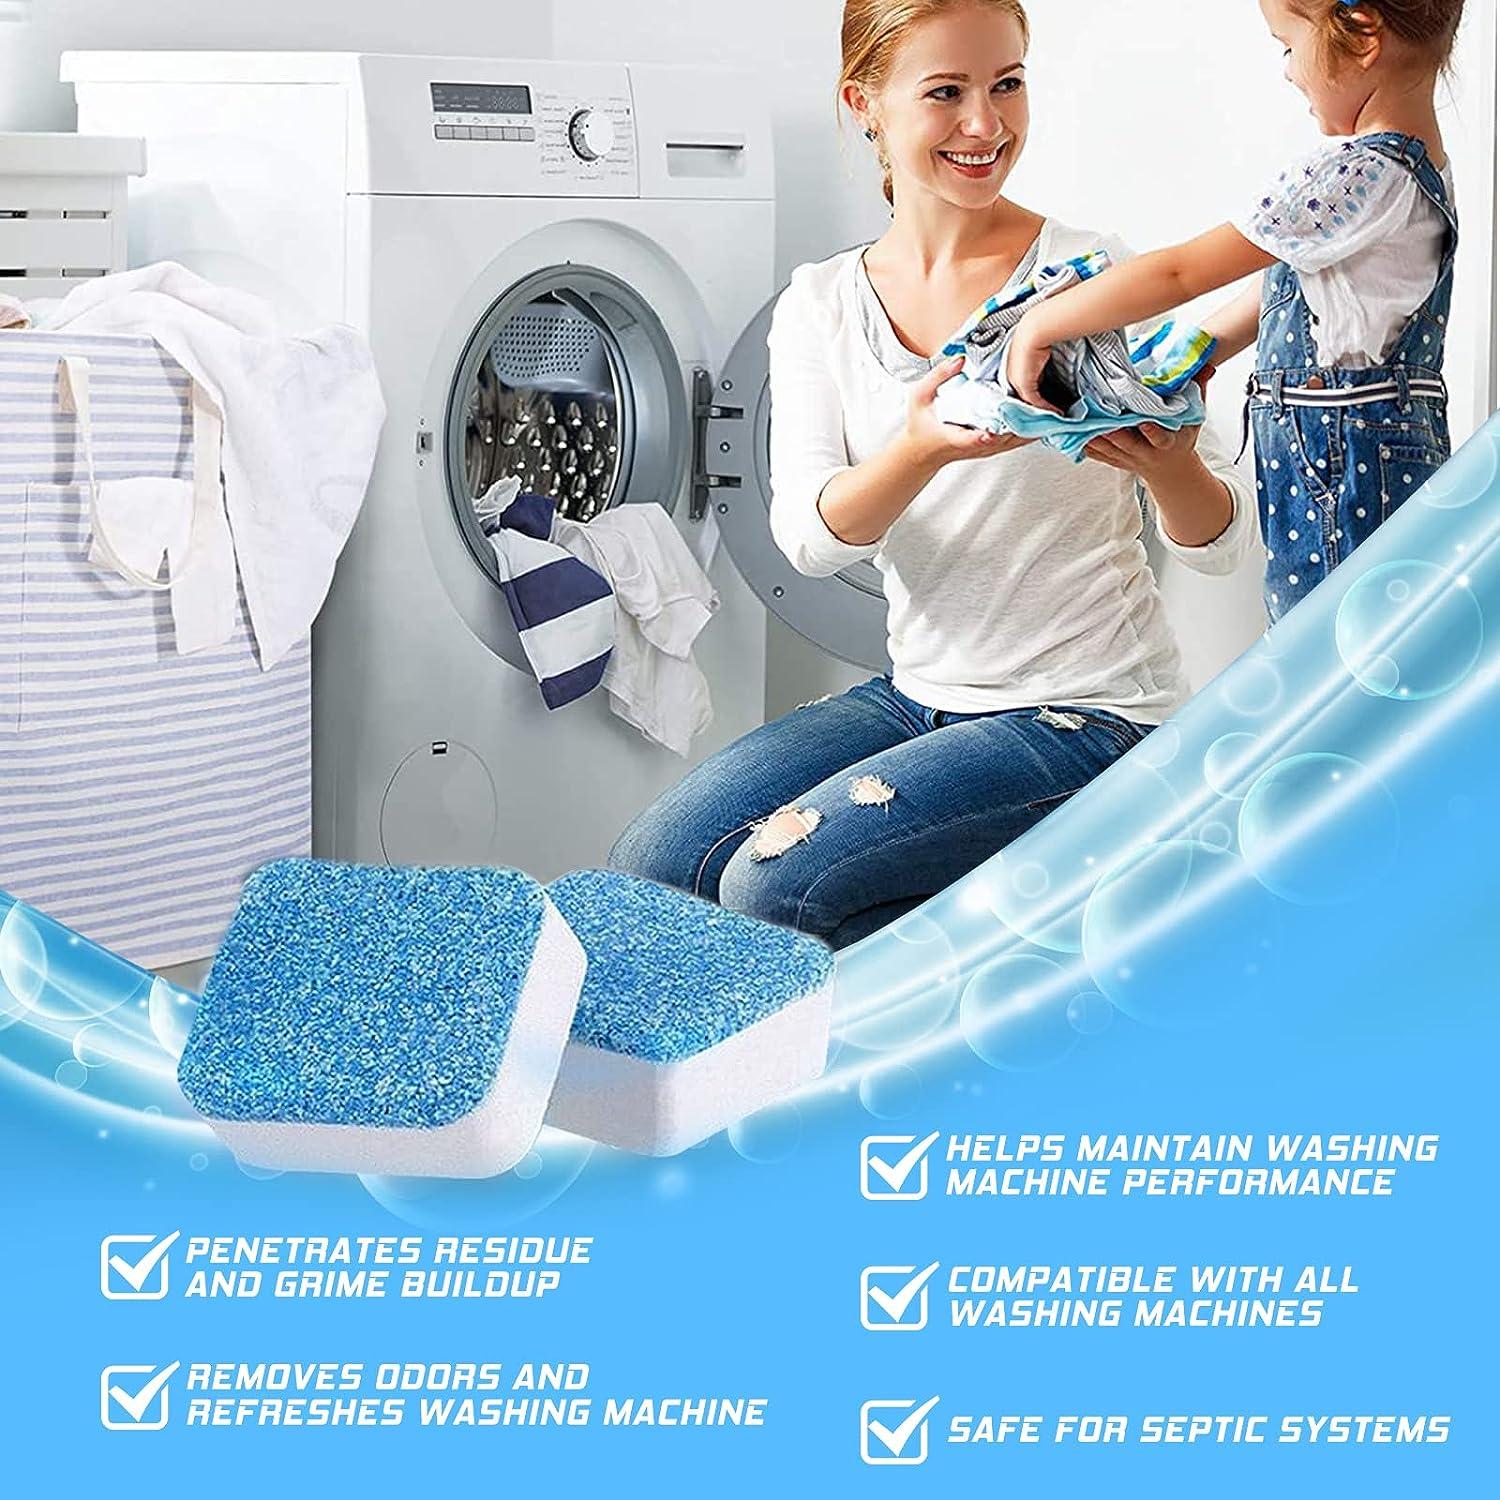 Damallren Washing Machine Cleaner, 24 Tablets Washer Machine Cleaner, Washing  Machine Deep Cleaning Tablets for All Washers Machines Including HE Front  Loader & Top Load Washer blue